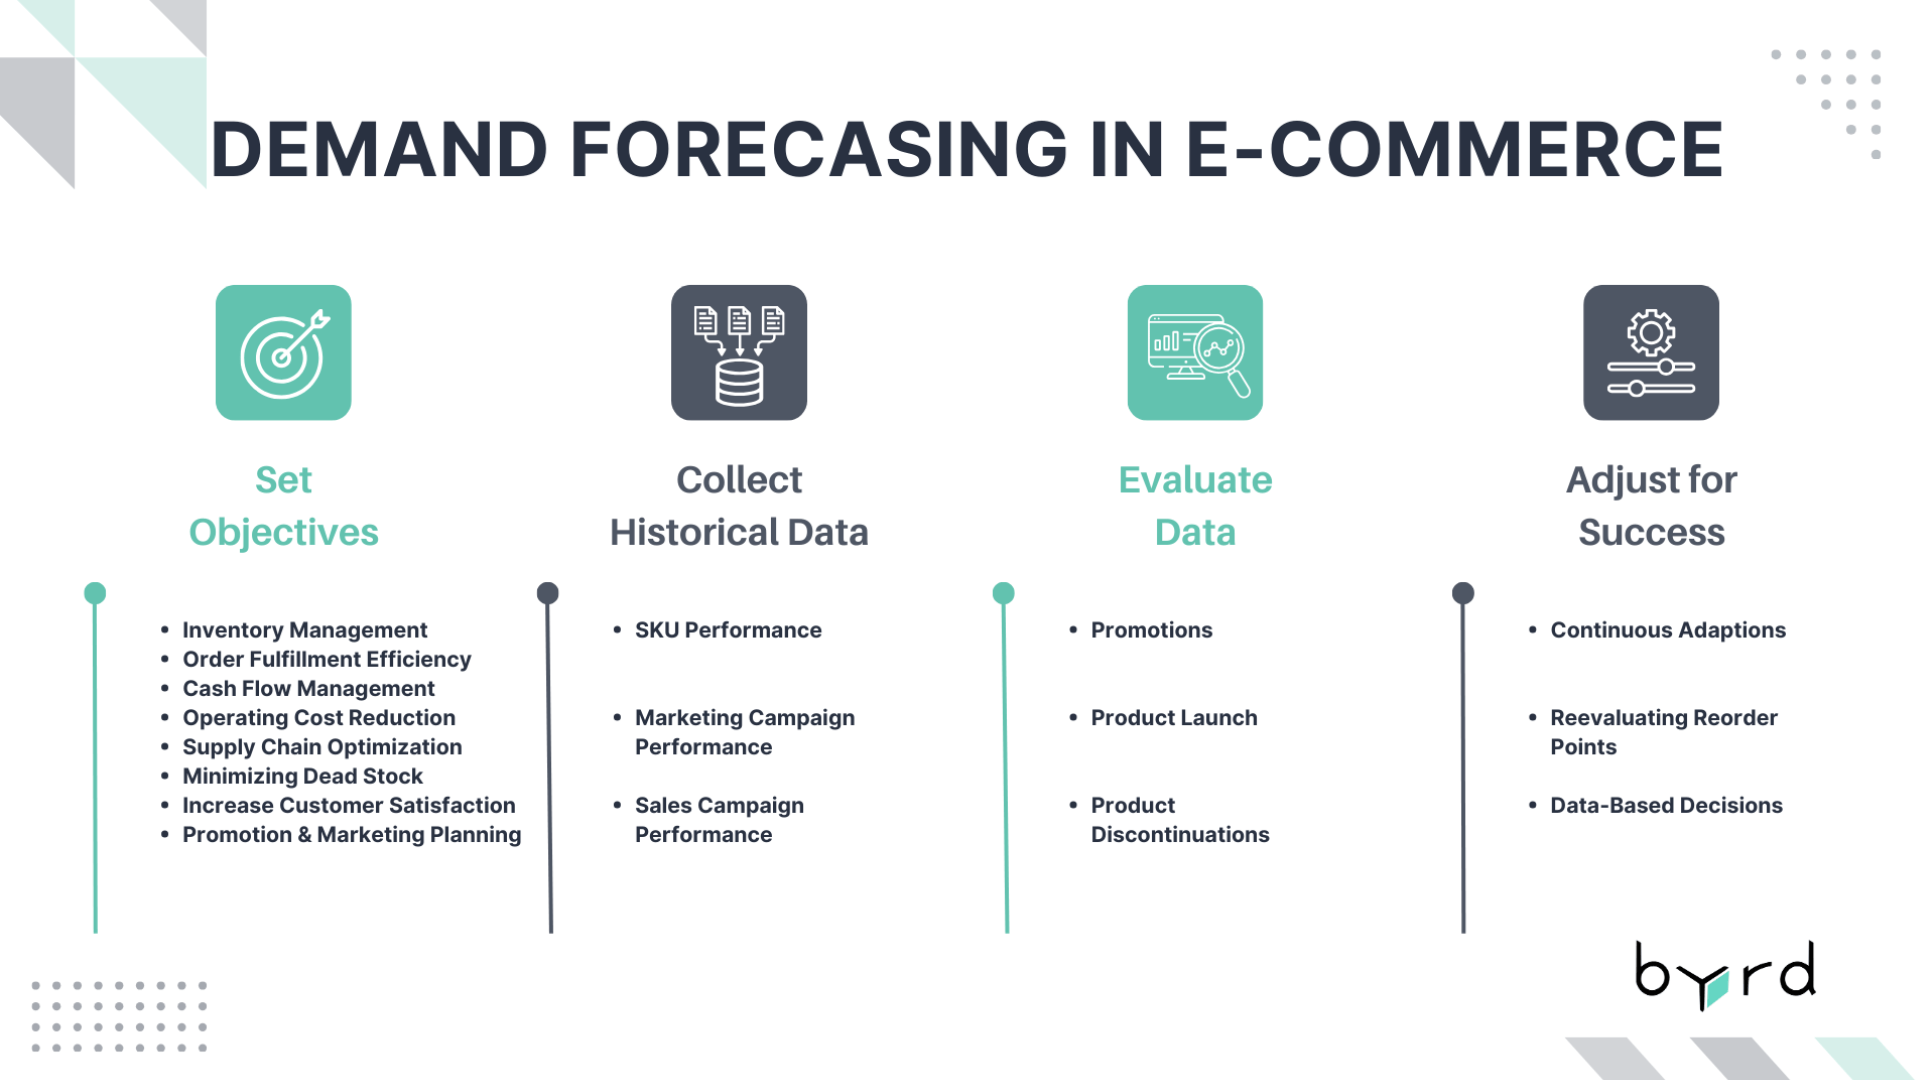 4 steps to demand forecasting in e-commerce